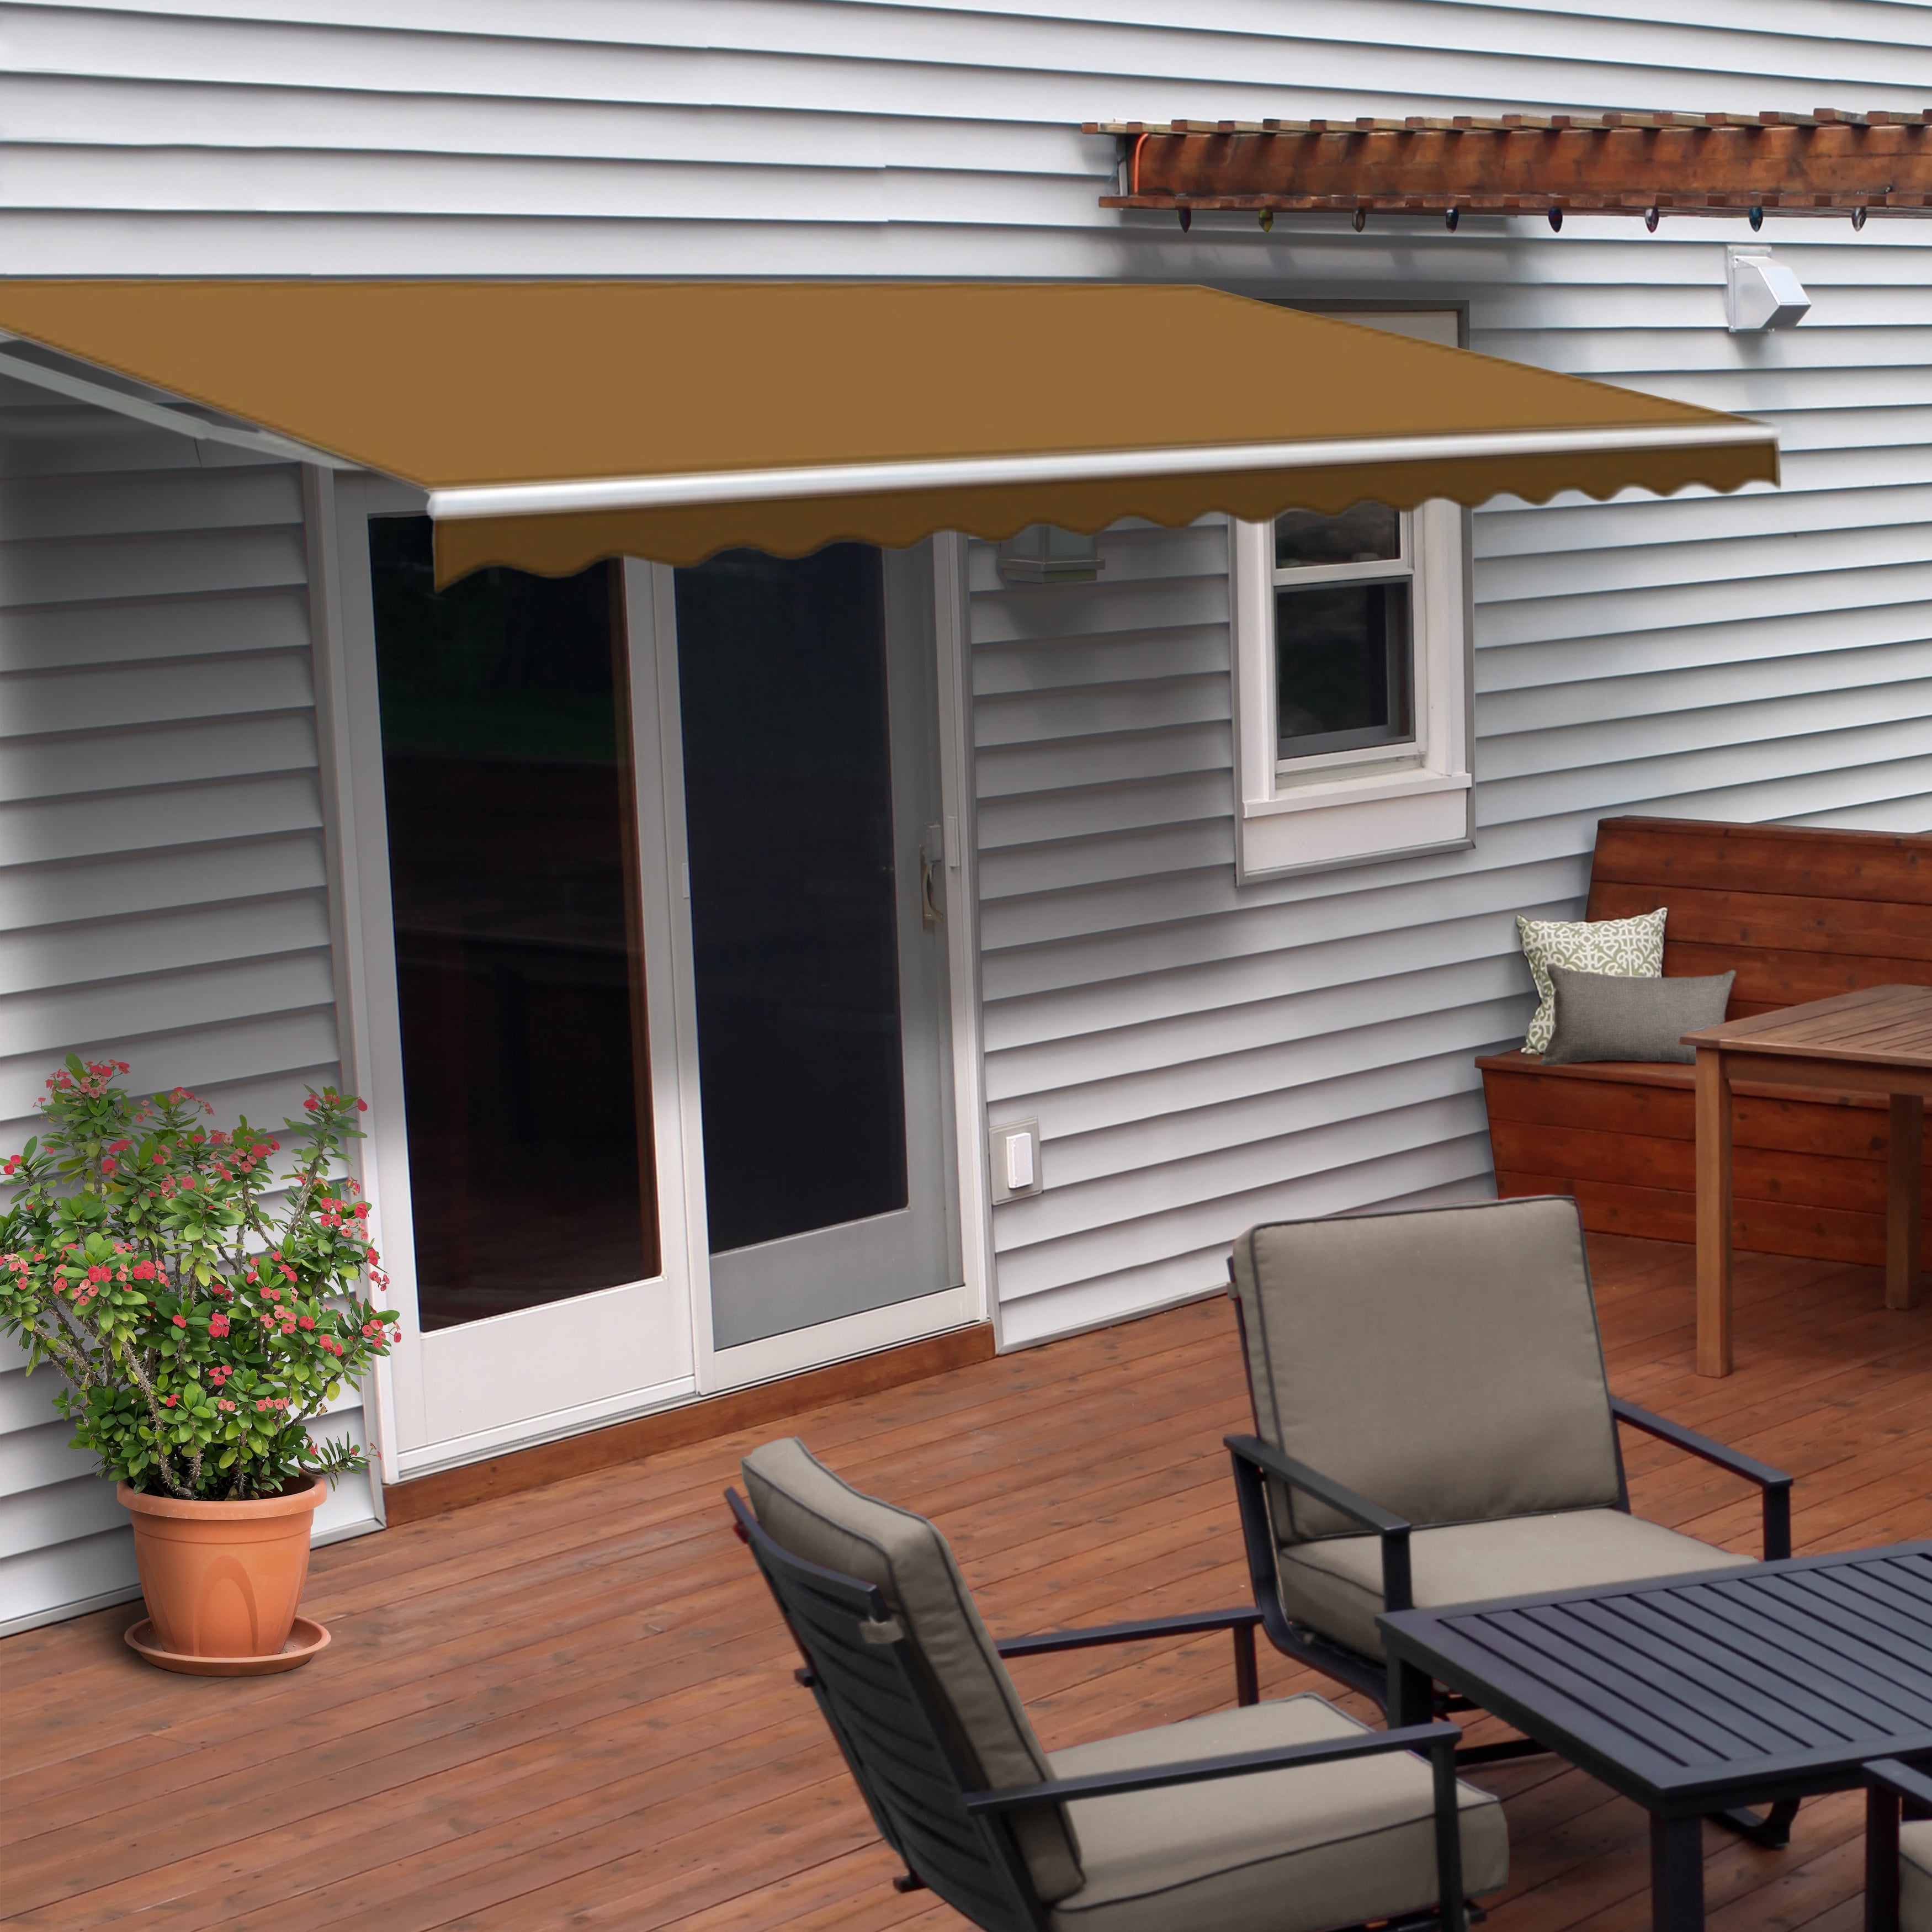 12x10/13x8 ft Retractable Awning Outdoor Patio Canopy Cover Deck Door Sunshade 